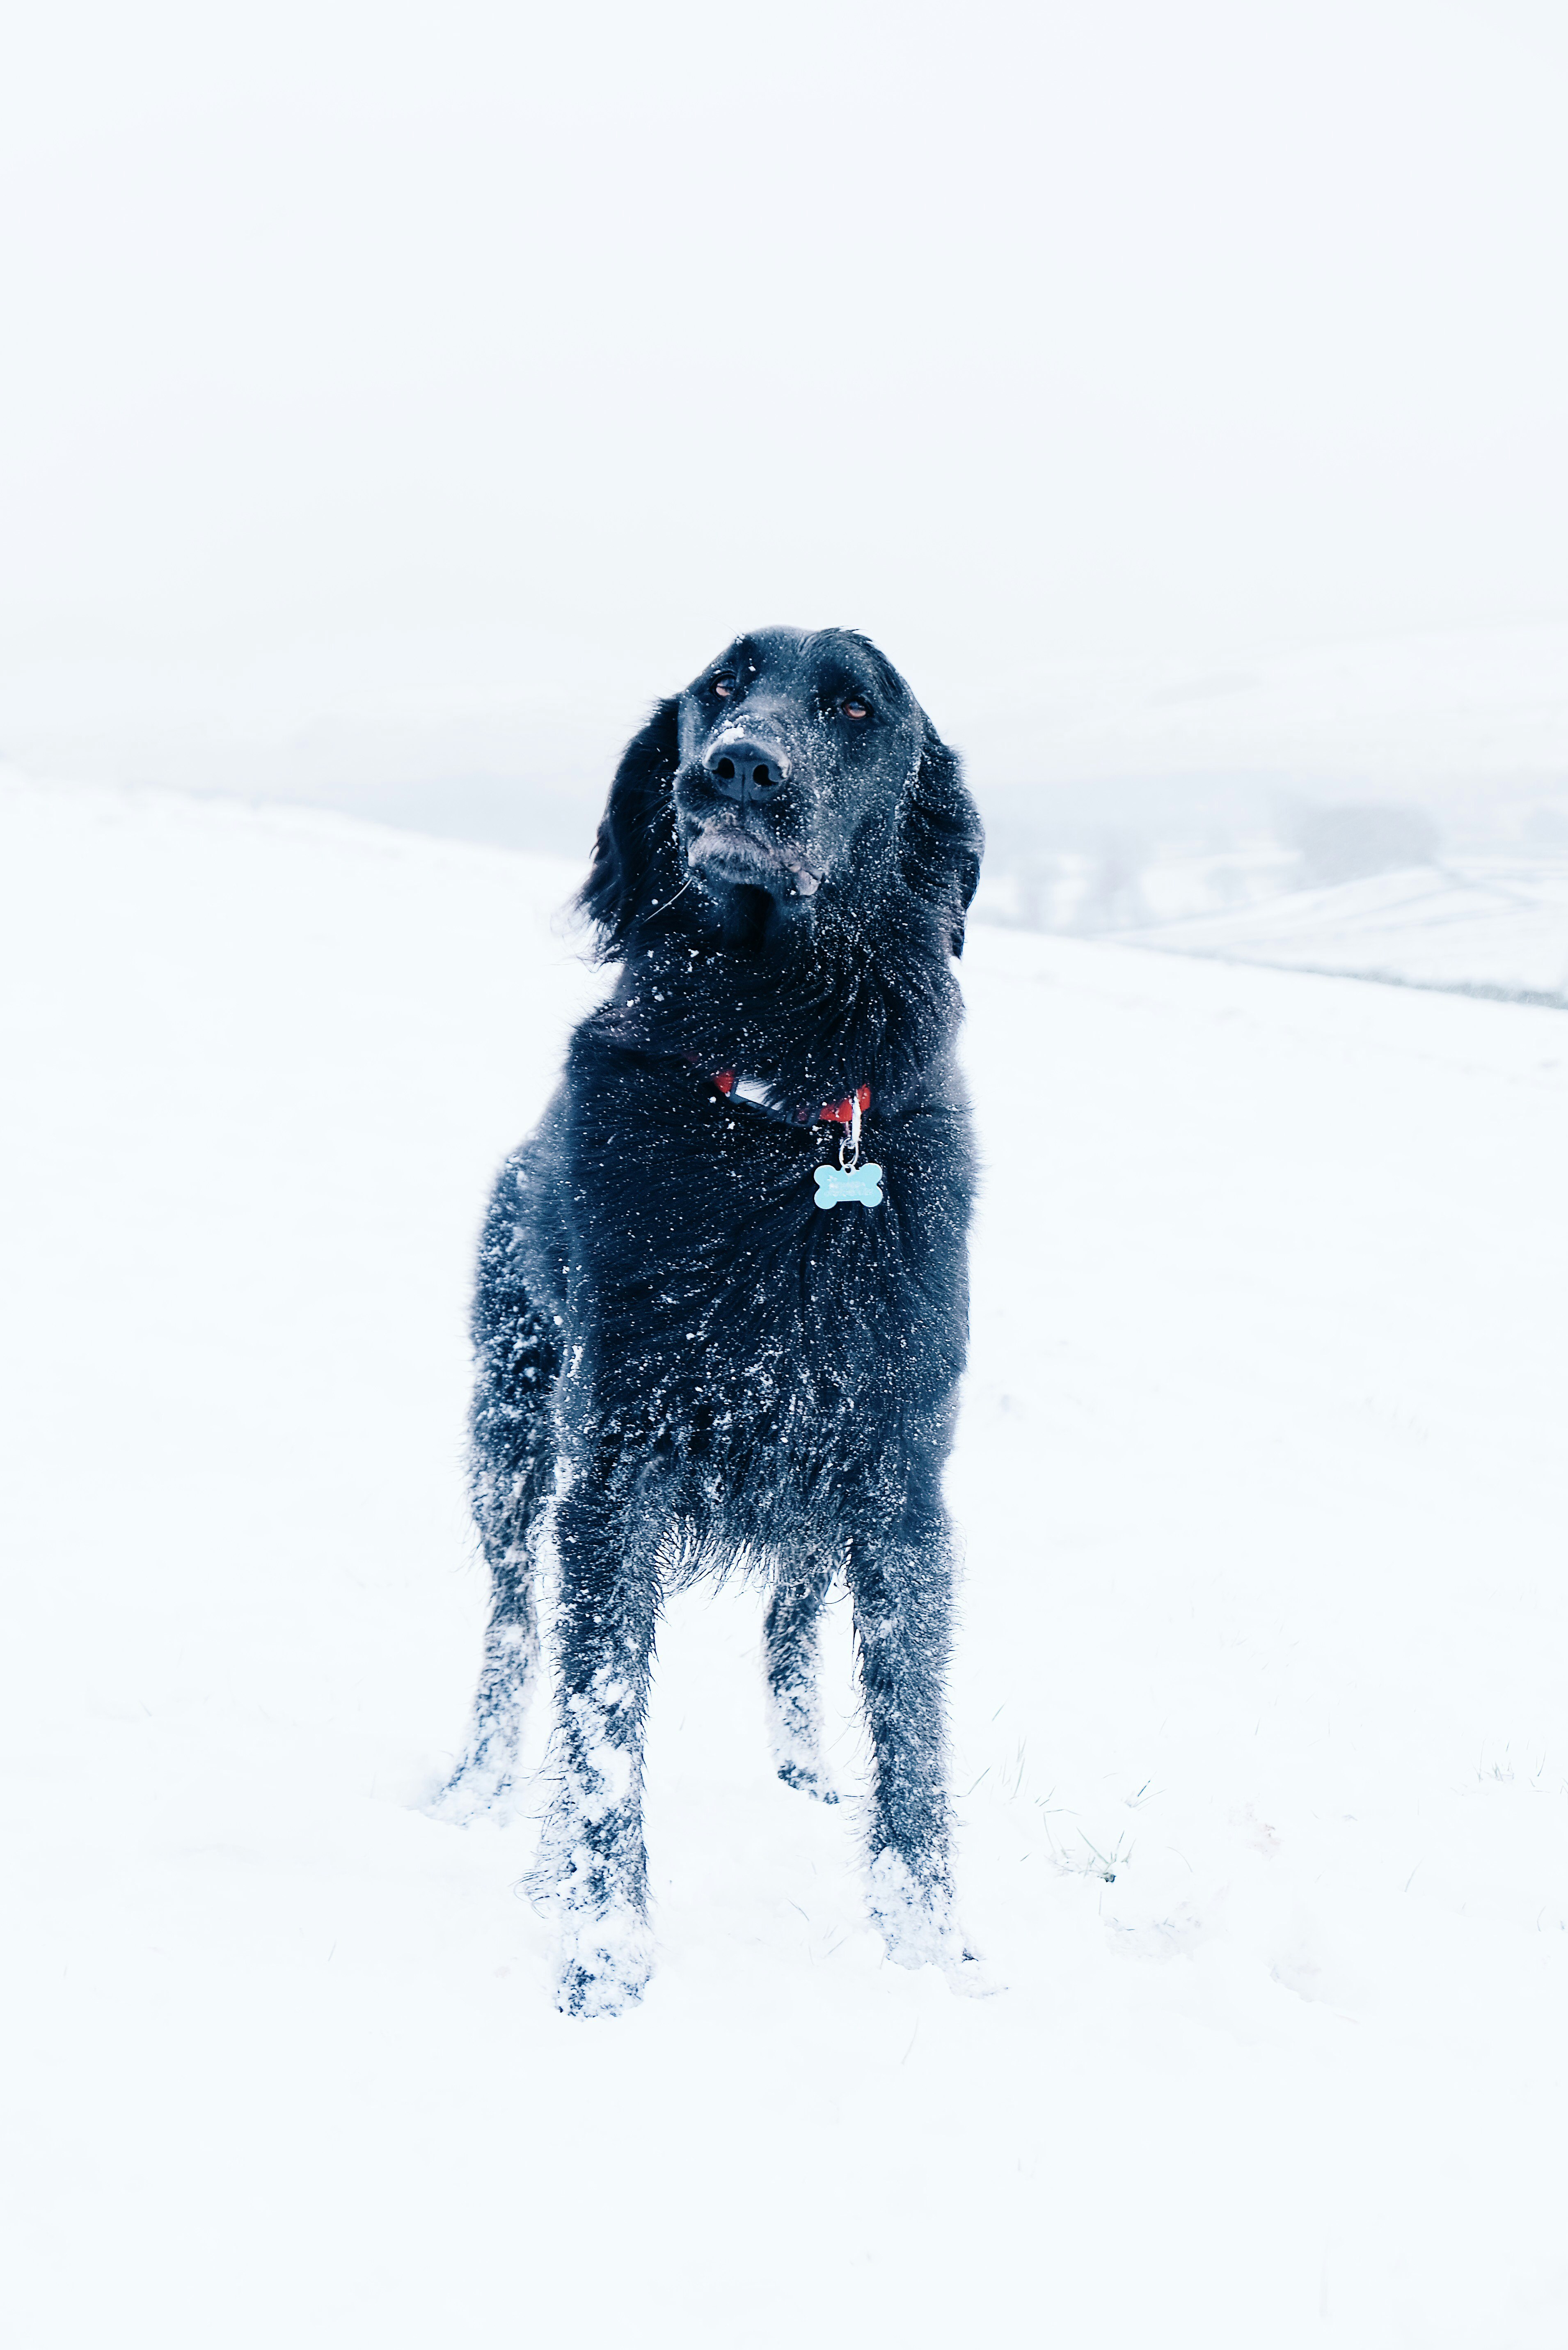 long-coated black dog standing on snow field